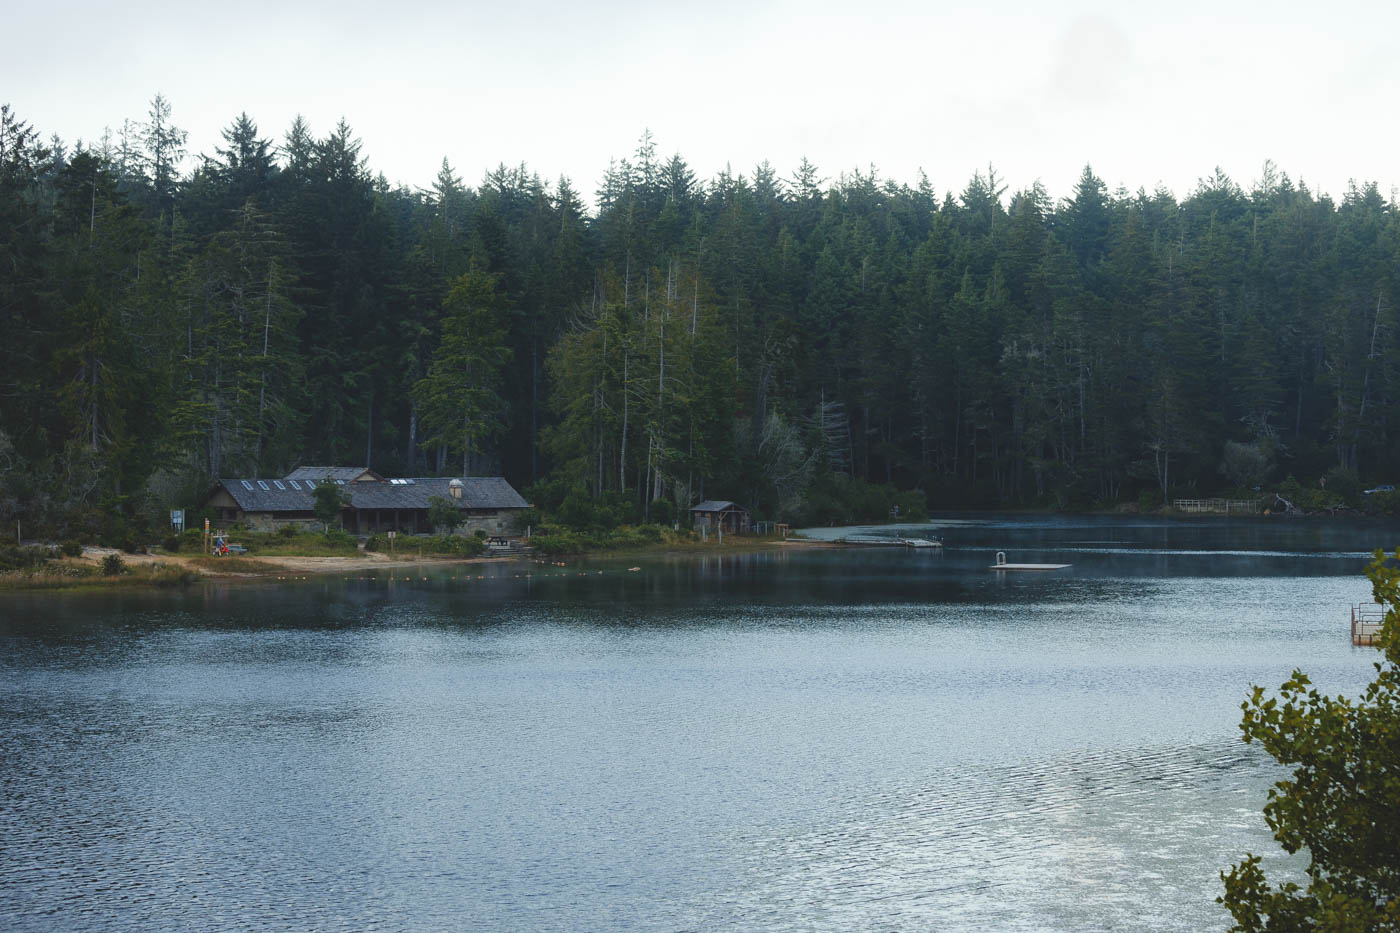 A cabin on the shores of Cleowax Lake with a backdrop of pine trees in Jessie M Honeyman Memorial State Park.